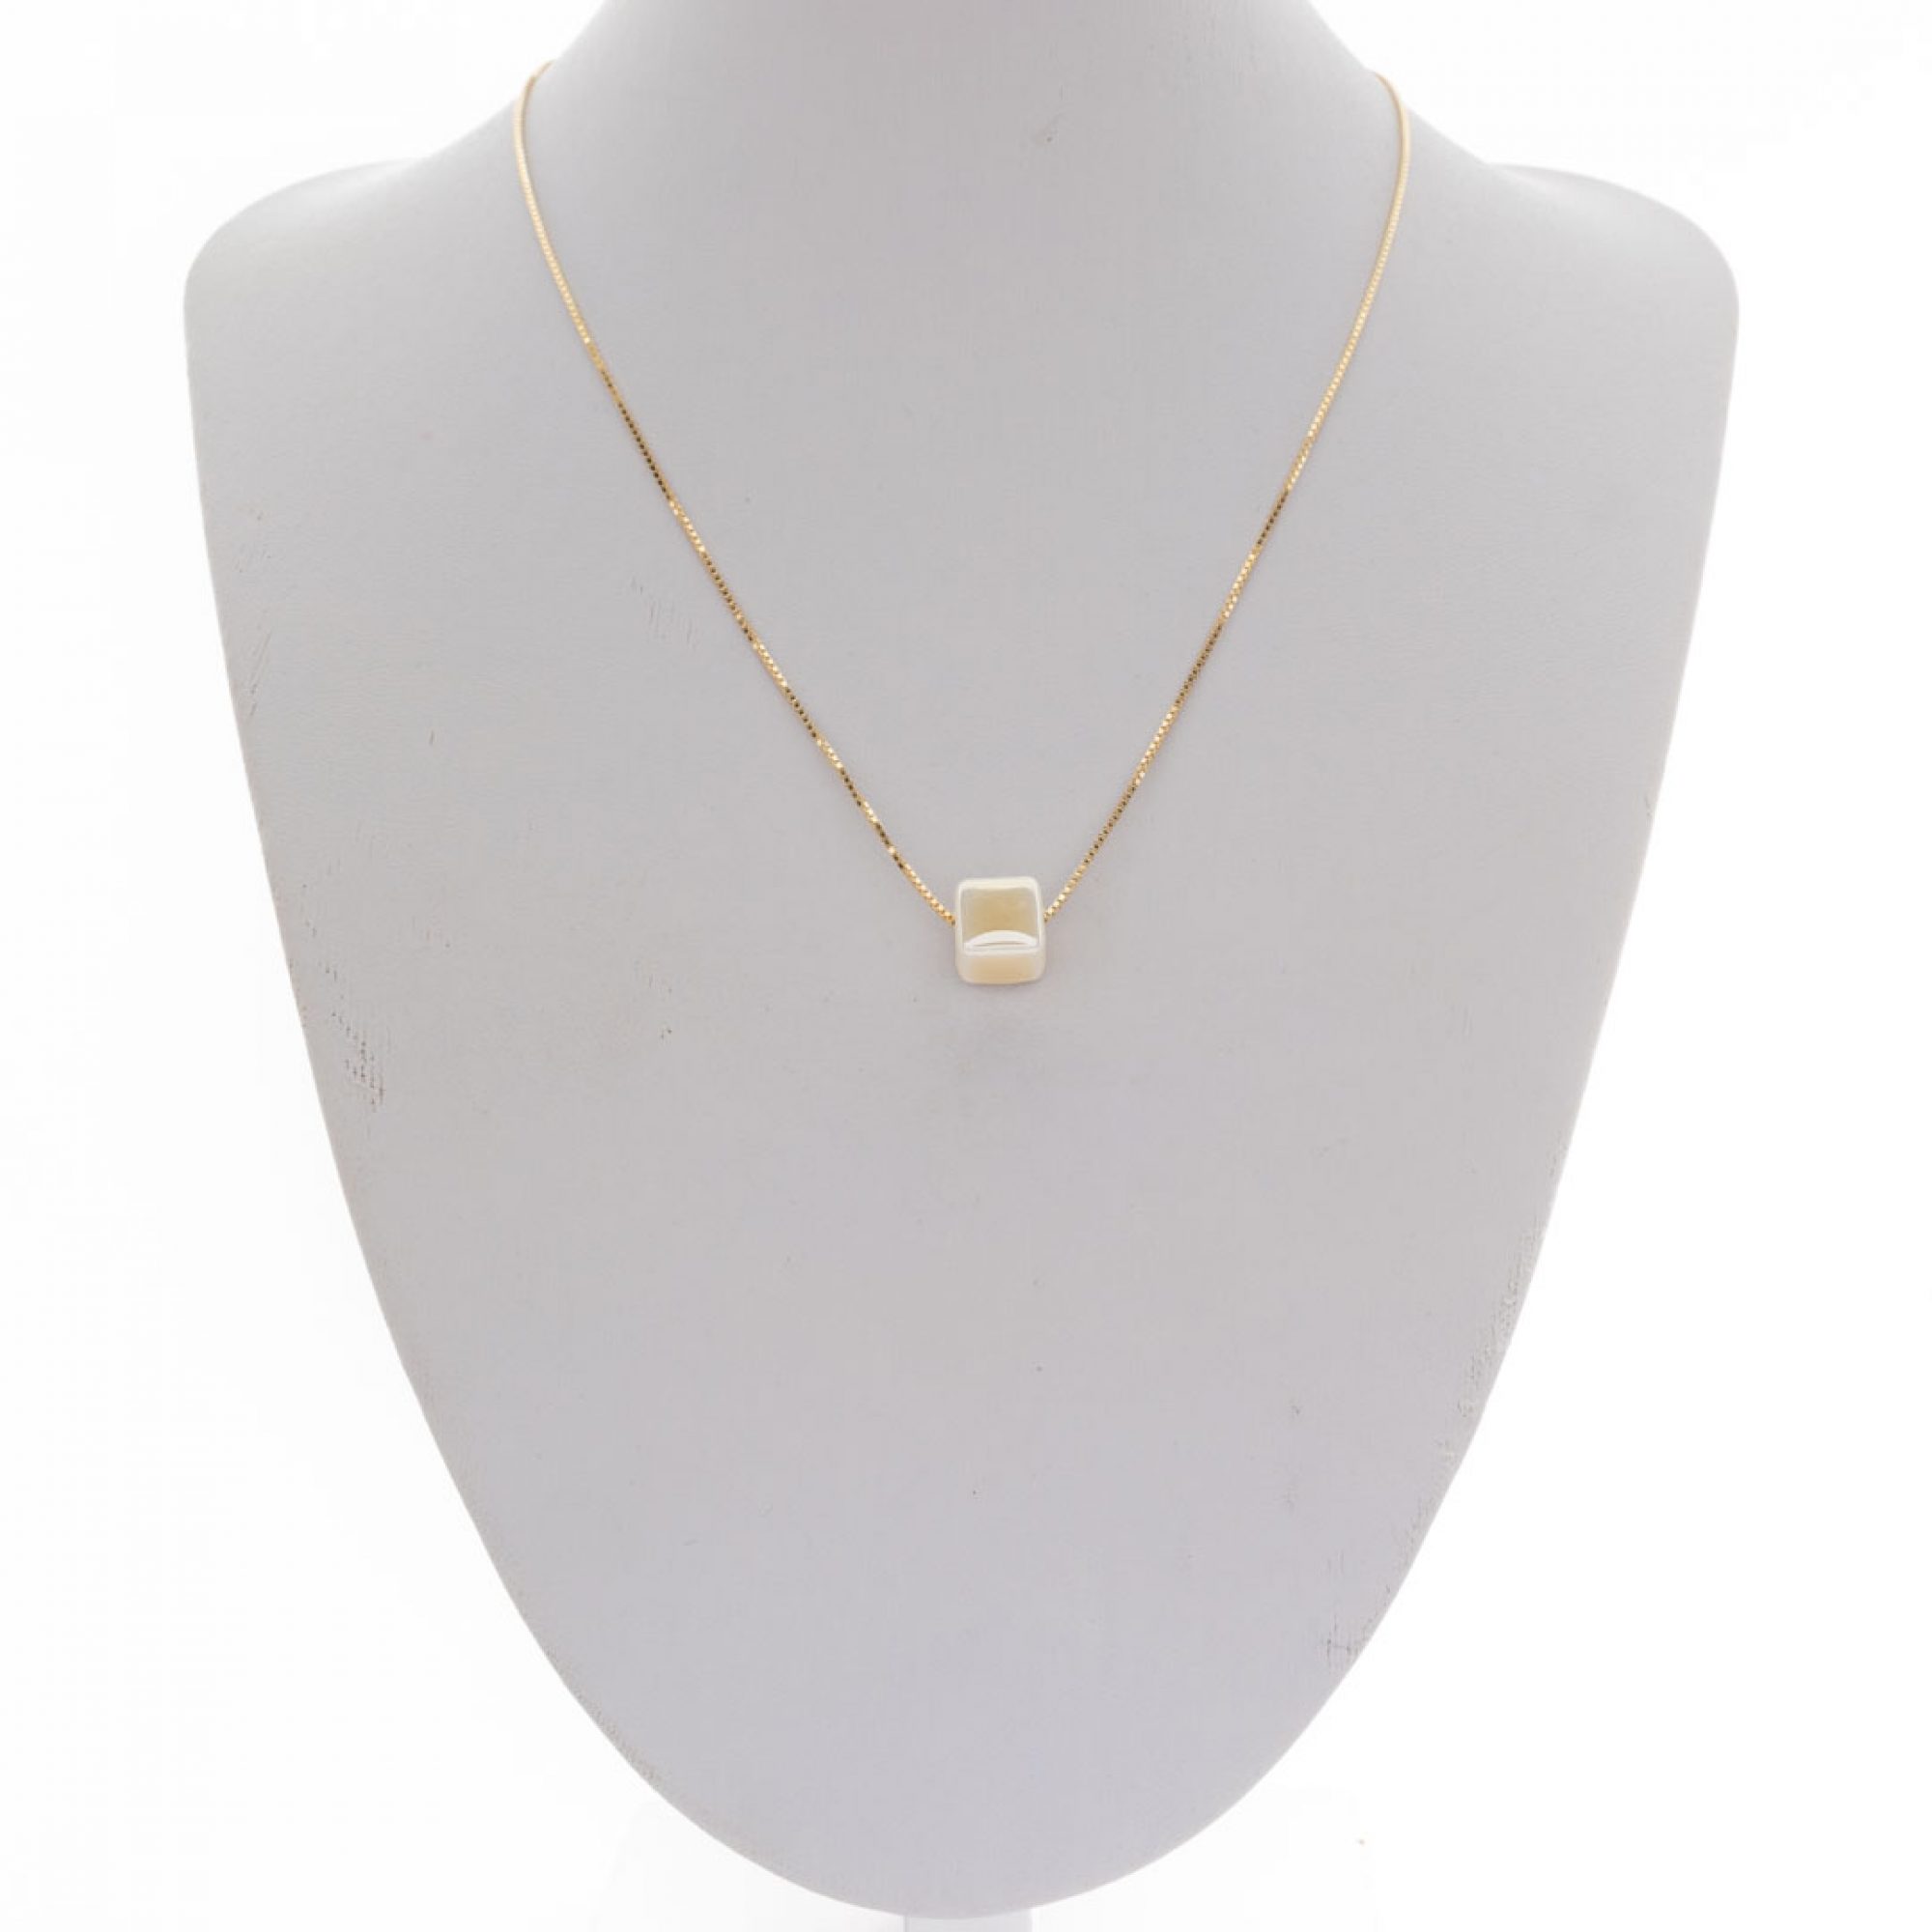 Gold plated beige bead necklace